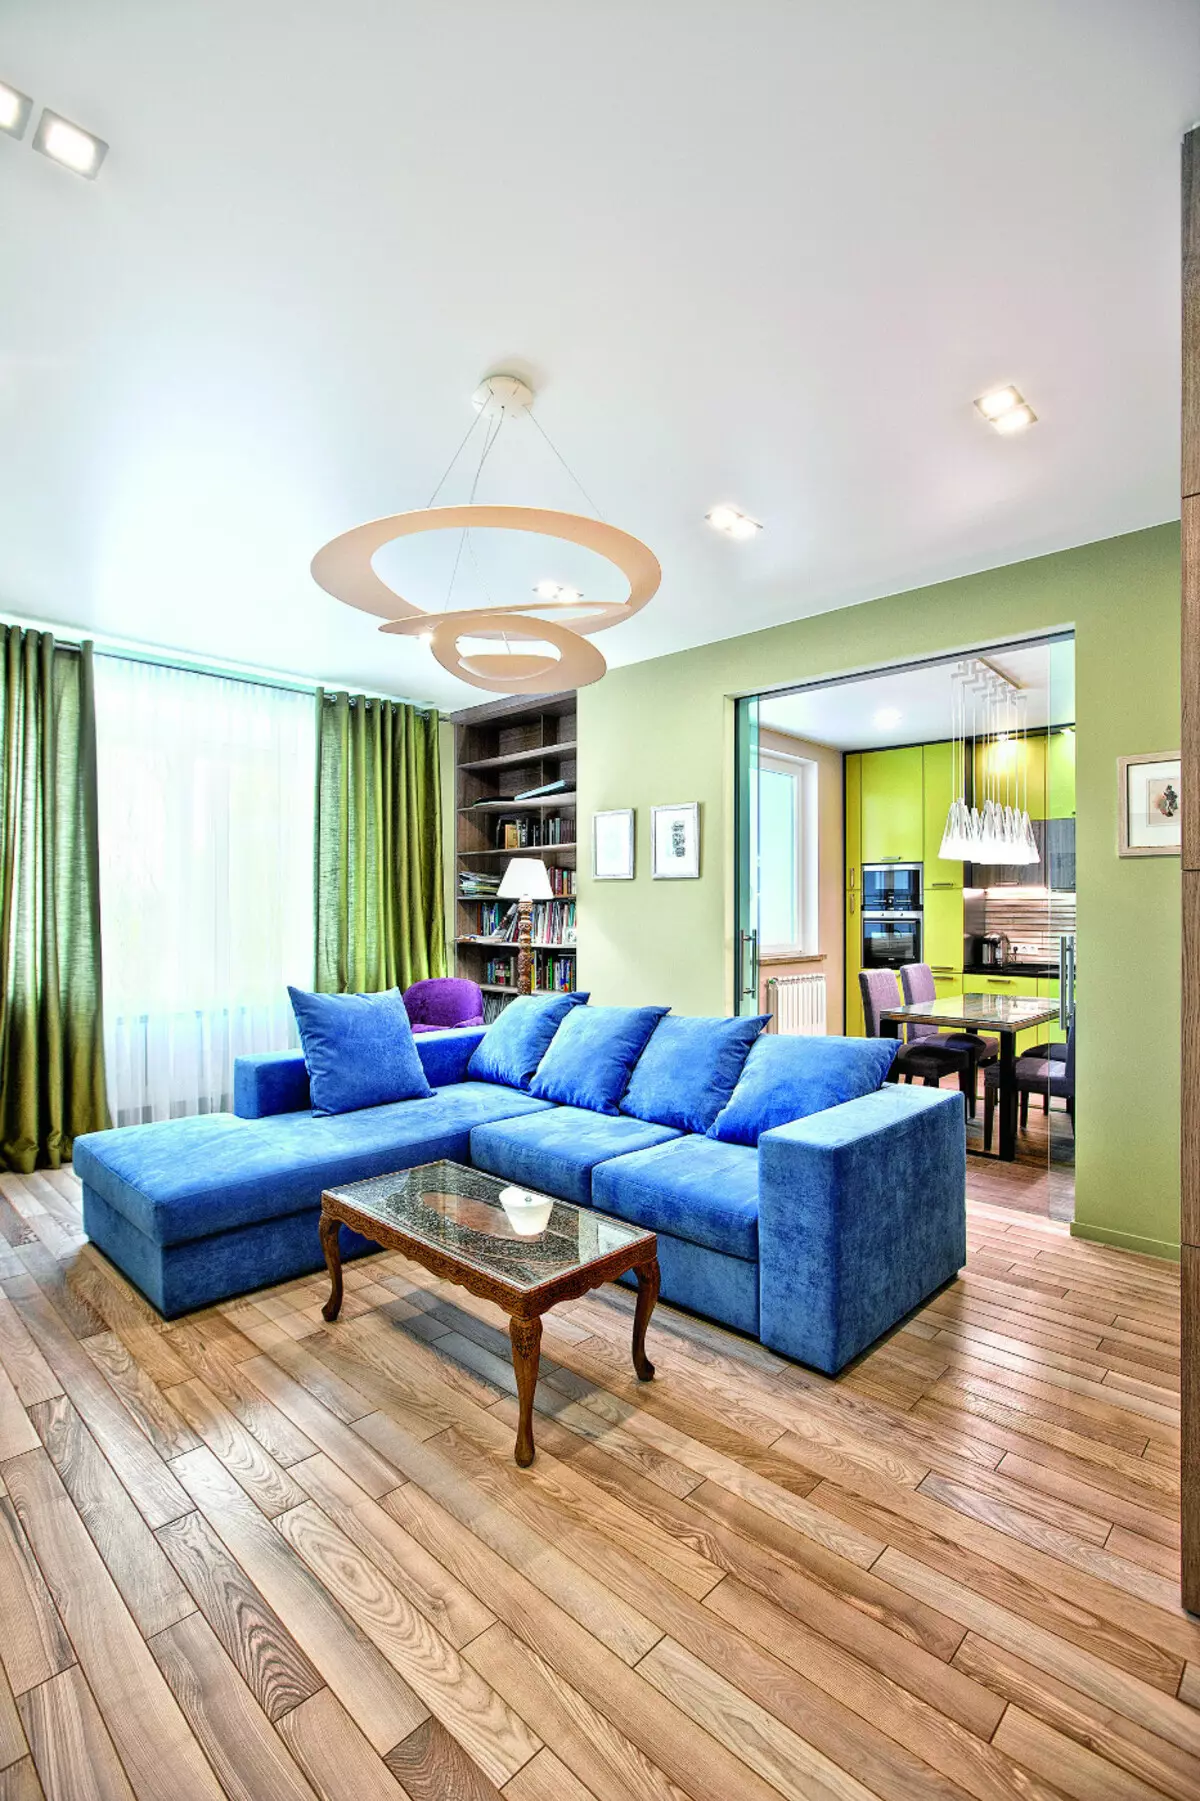 Unusual color solutions in the interior